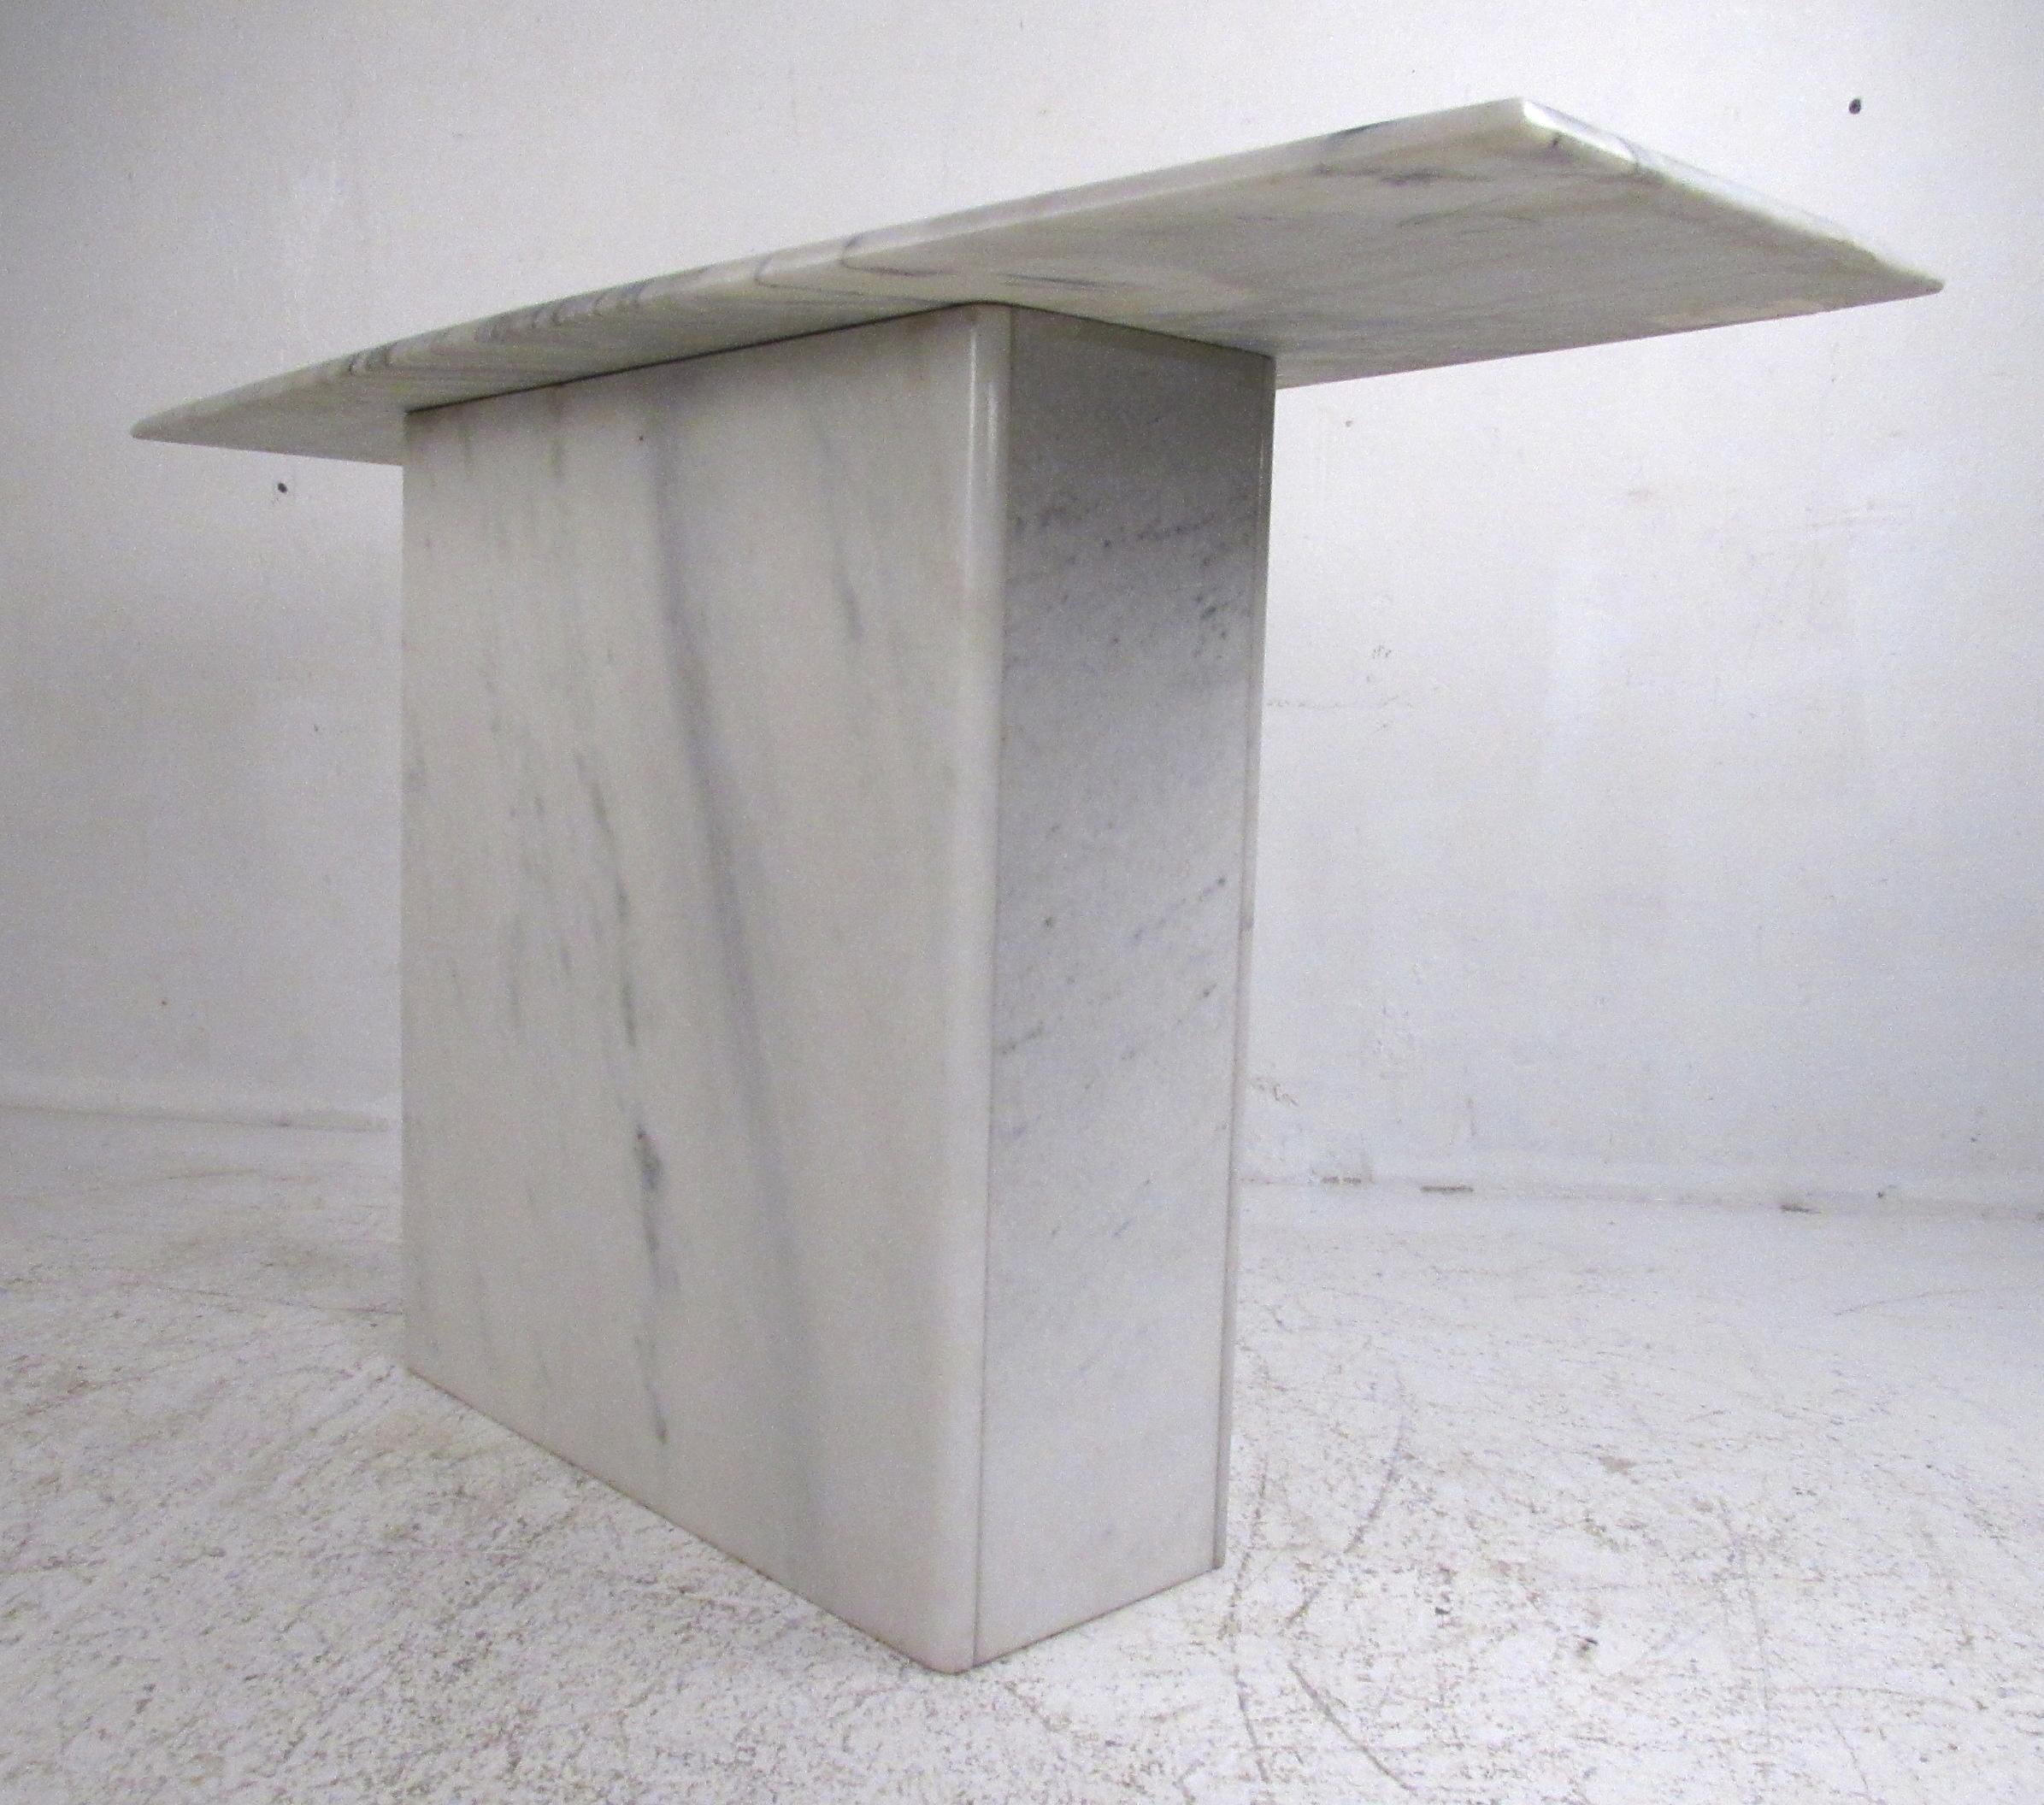 Simple, understated but elegant pedestal console table in white and grey marble.
Please confirm item location (NY or NJ) with dealer.